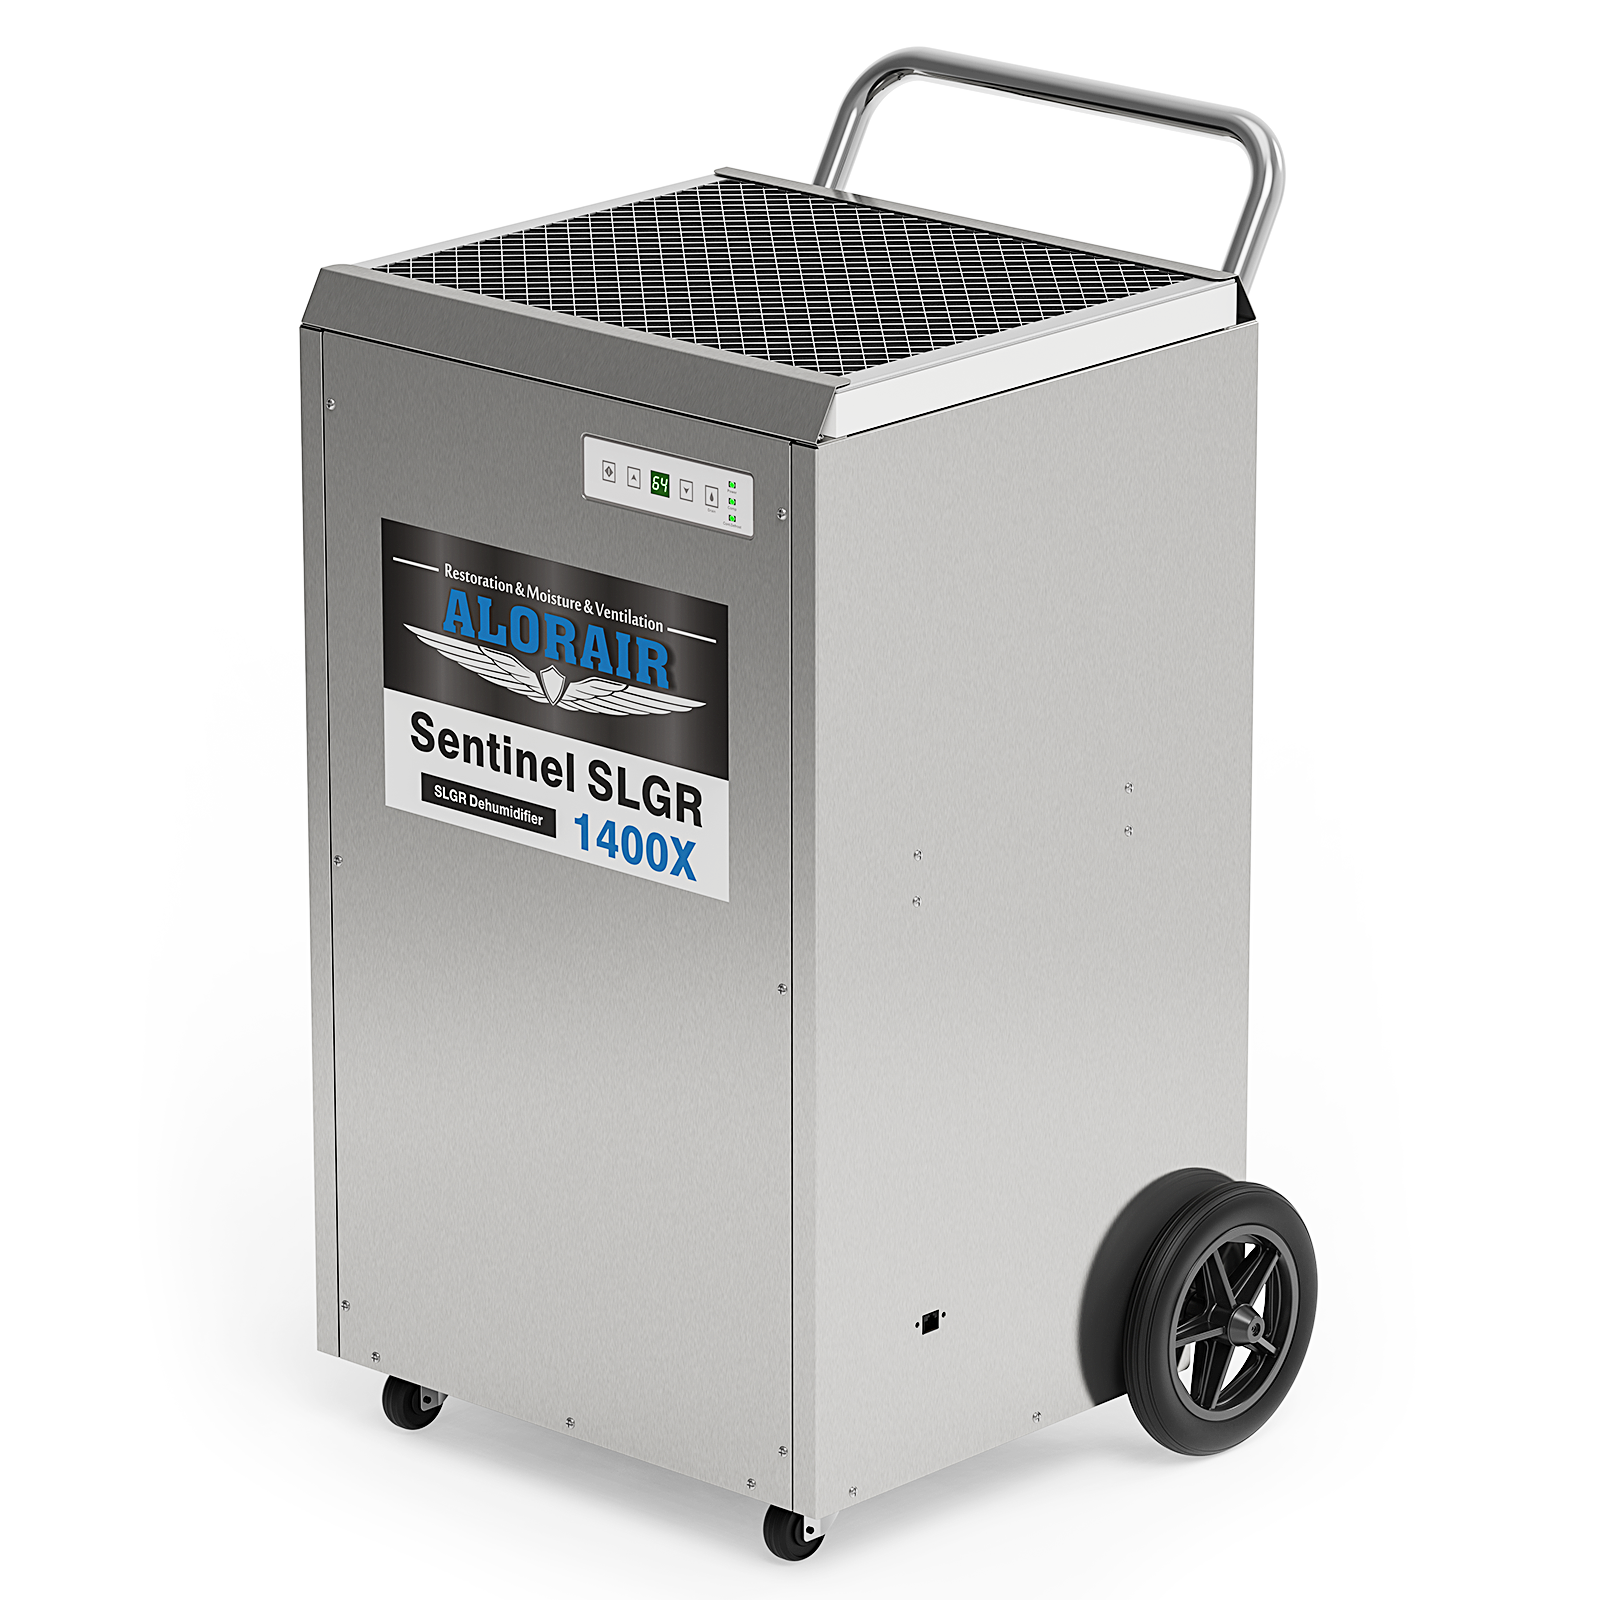 AlorAir® Sentinel SLGR 1400X Commercial Dehumidifier, 140 PPD with Pump, Stainless Steel Body